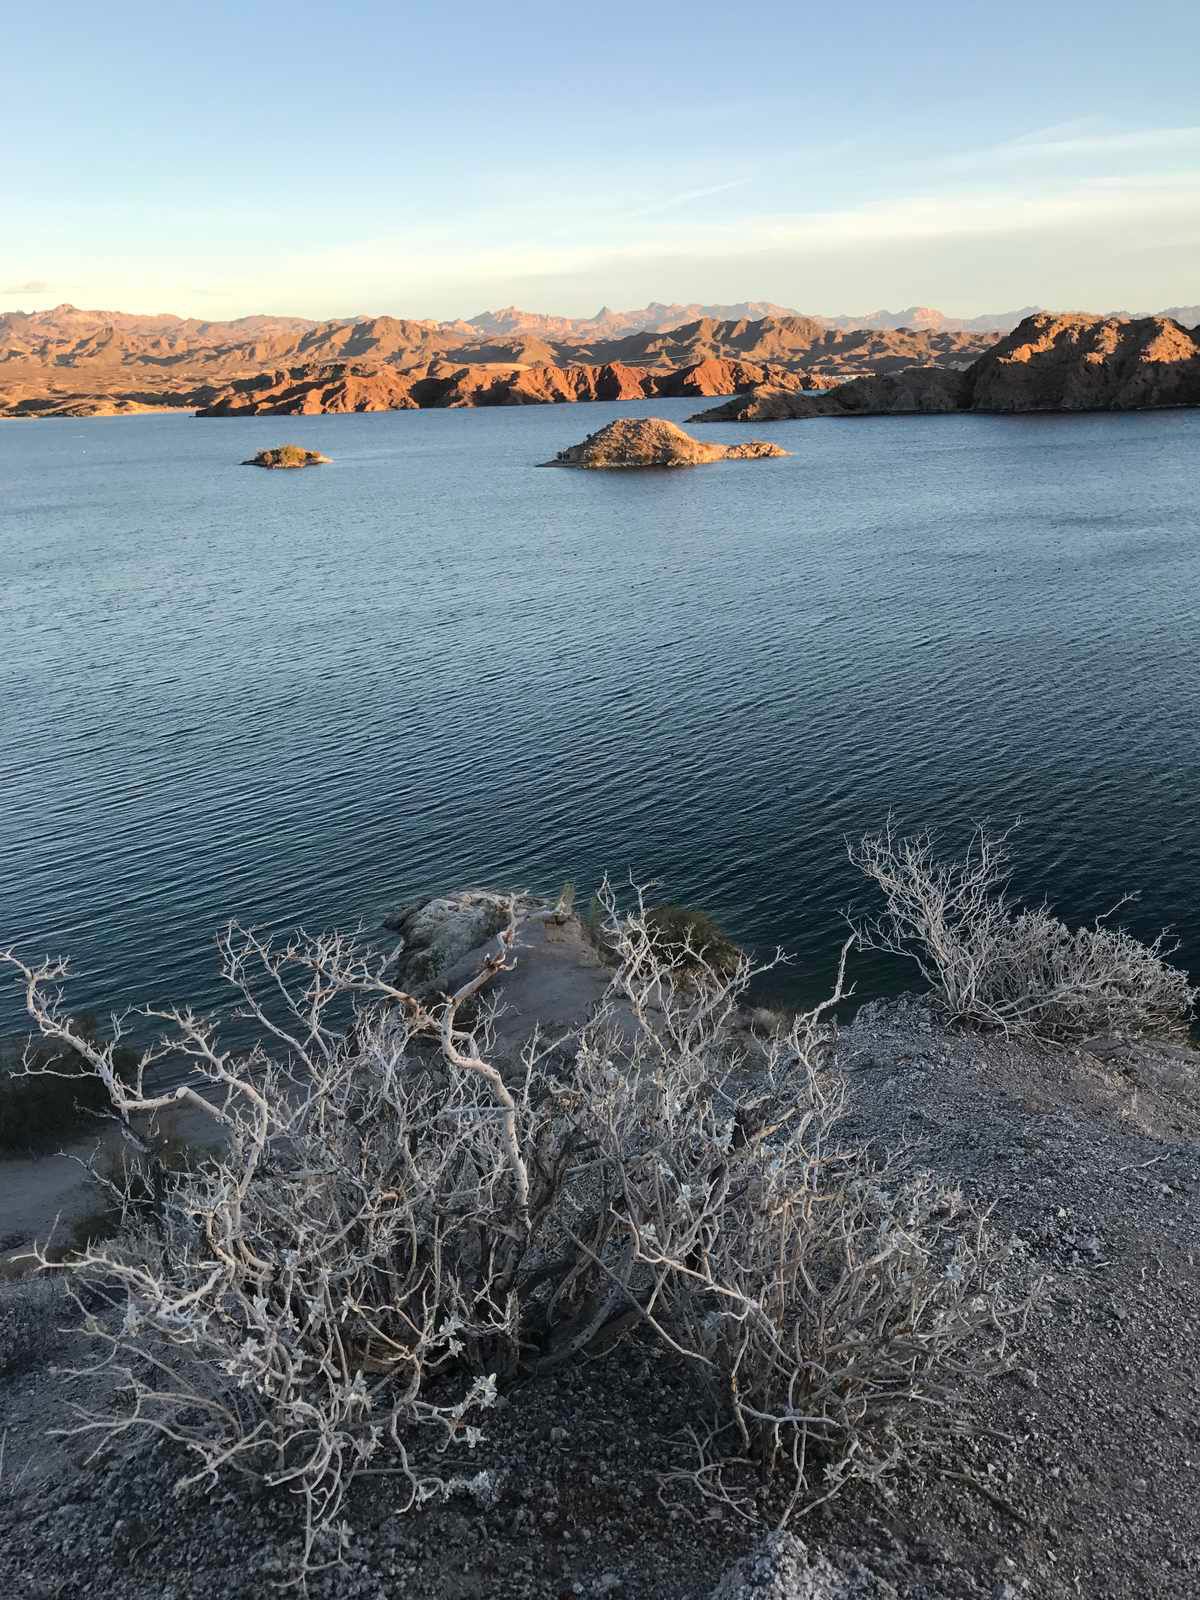 View of Lake Mohave from Telephone cove (2017)